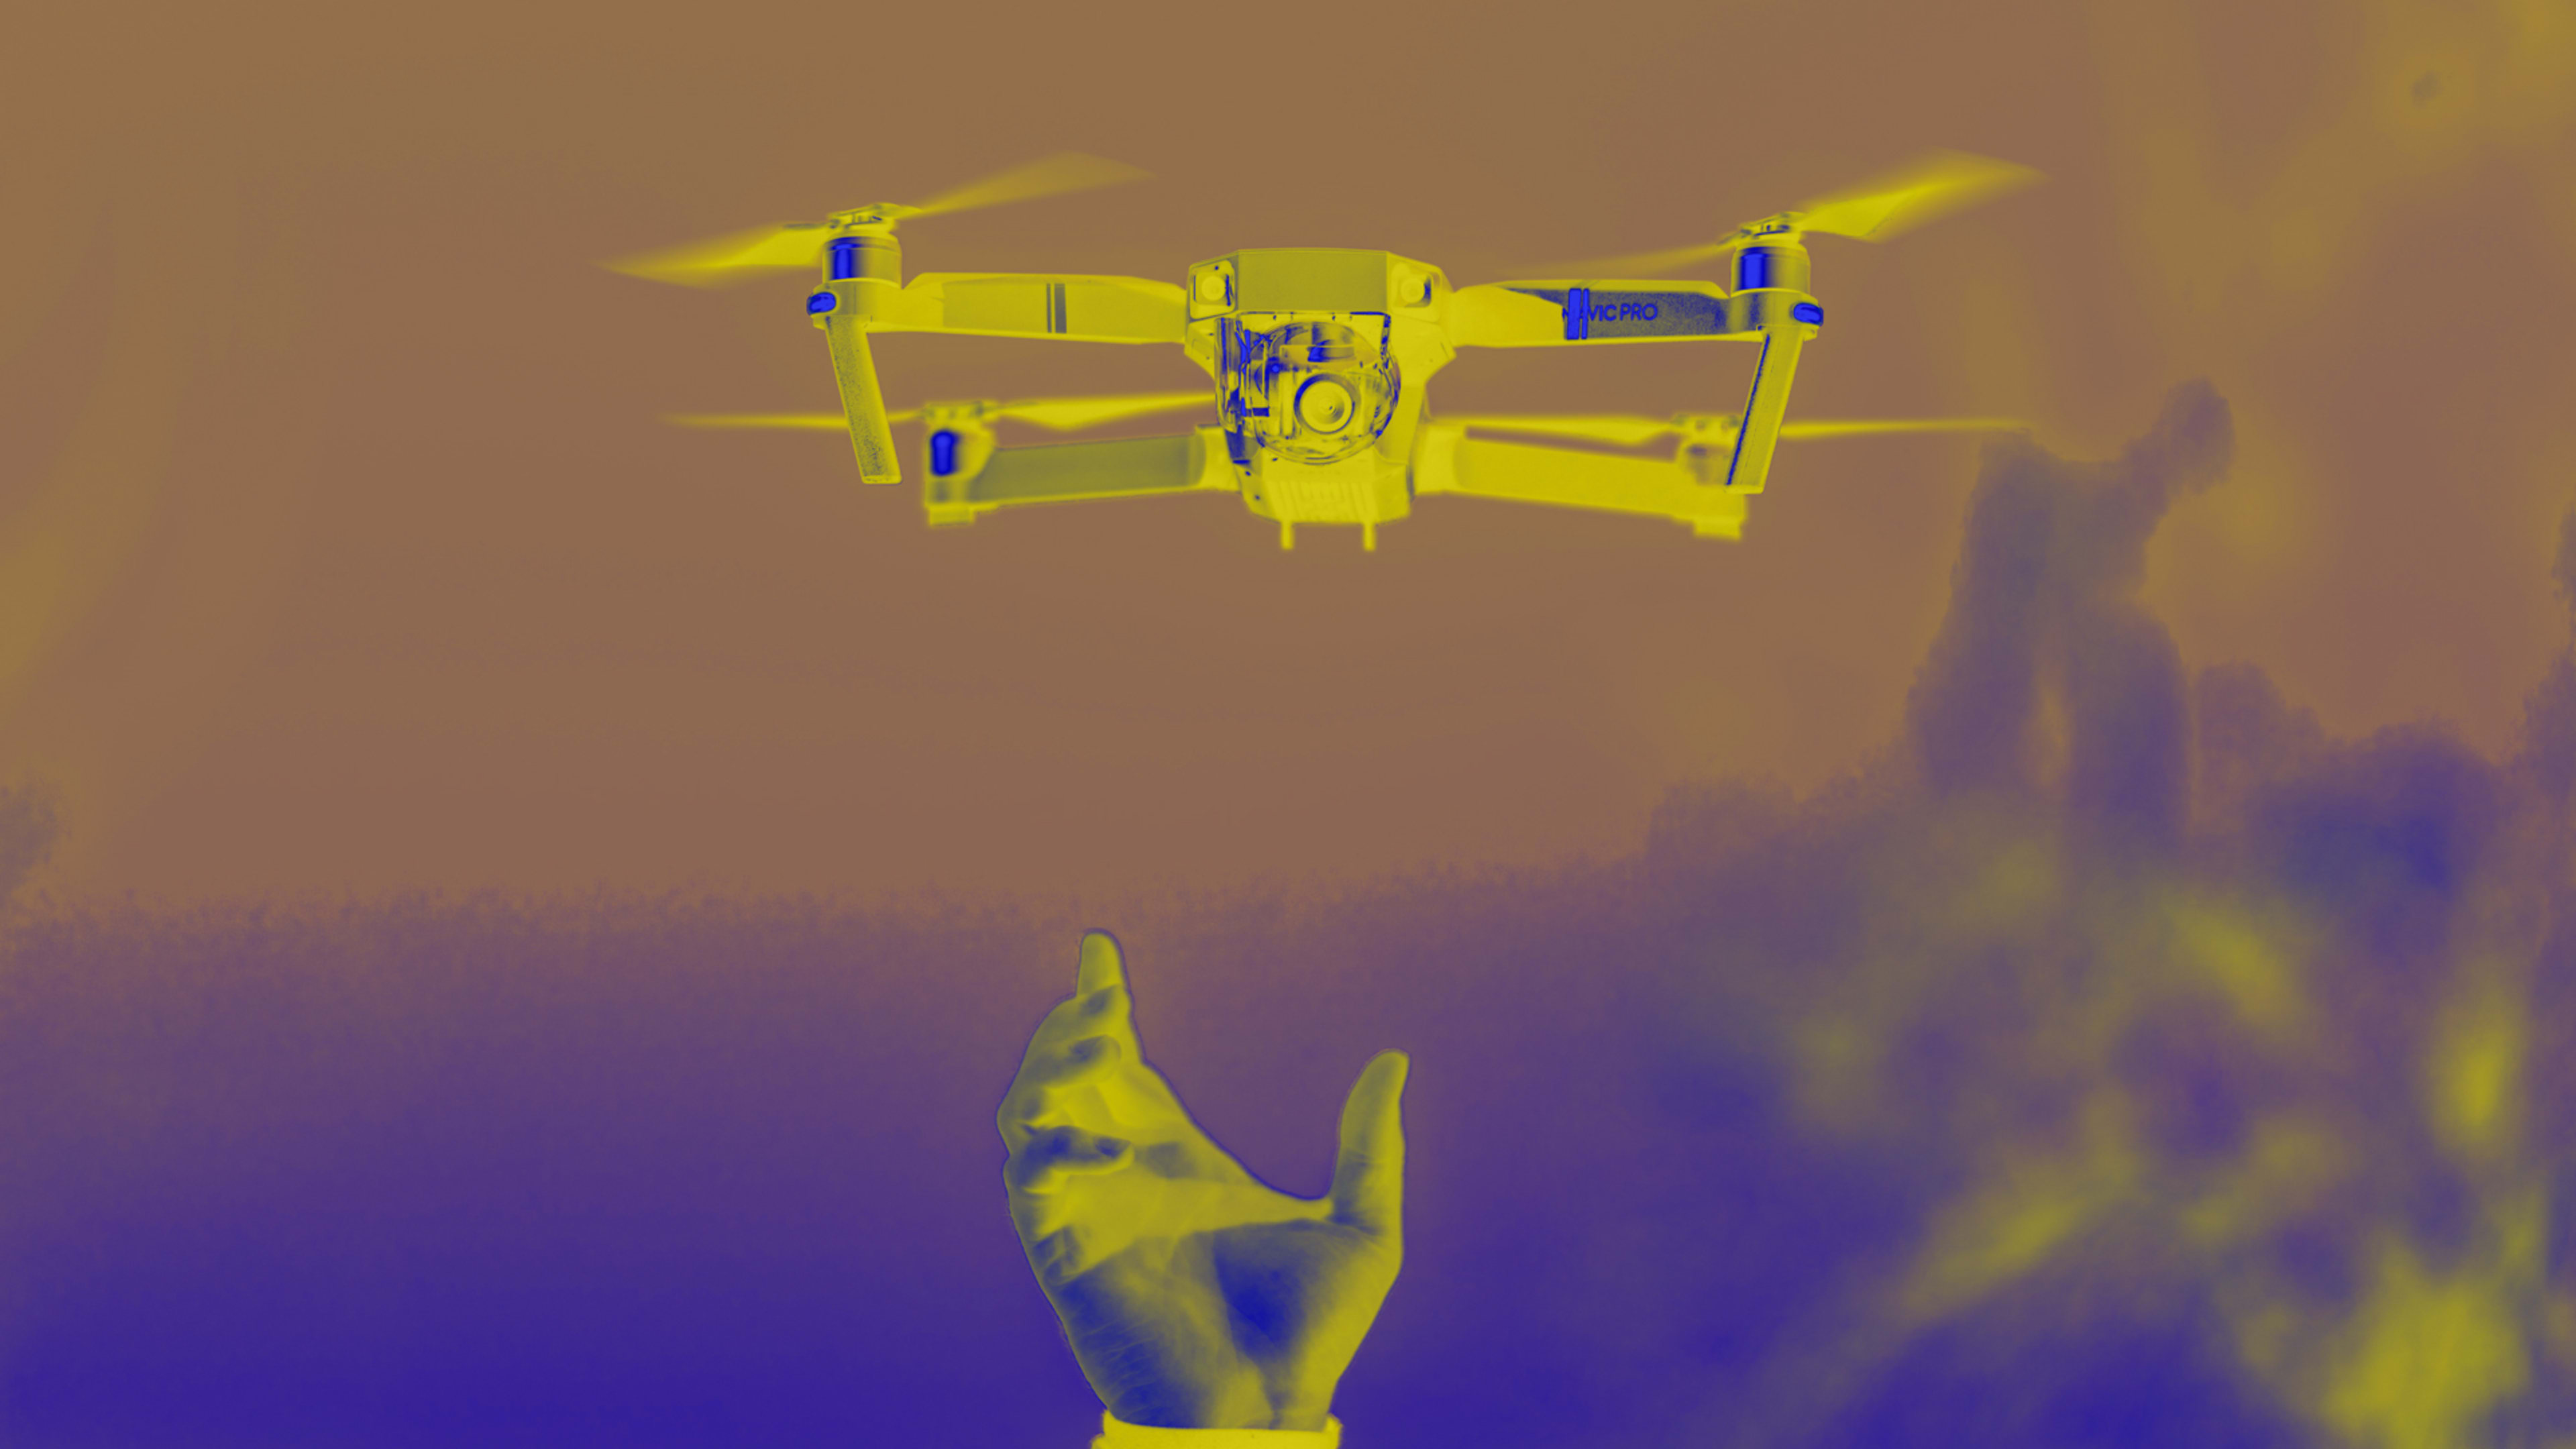 Policing tech’s biggest ethics panel collapses over proposed Taser drone